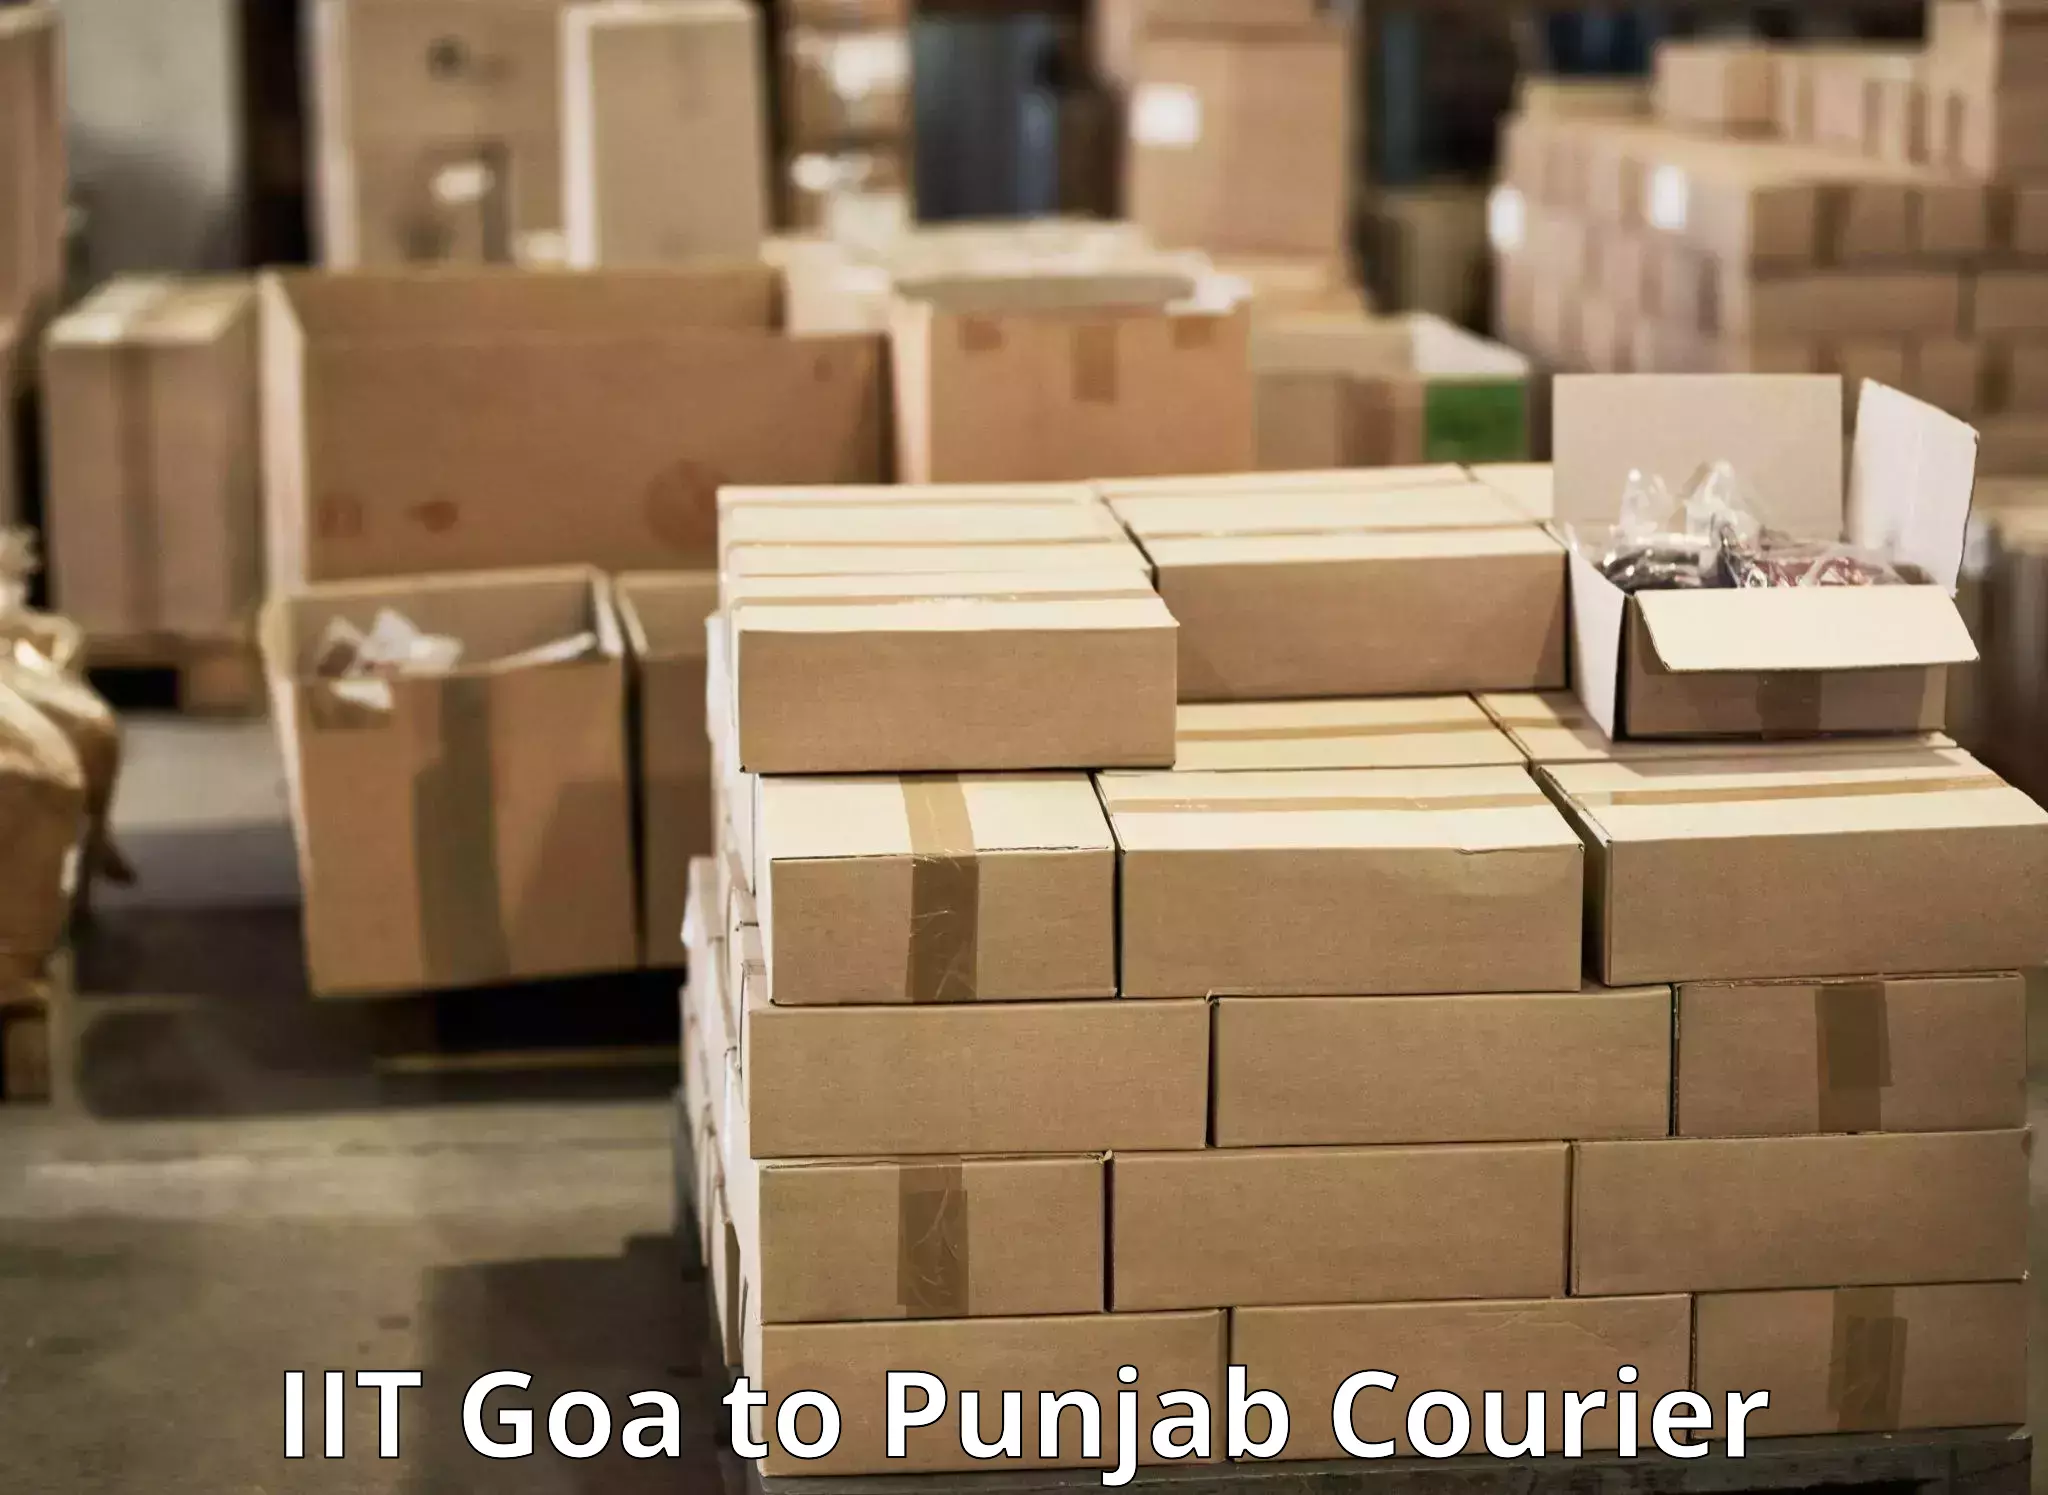 User-friendly delivery service IIT Goa to Beas